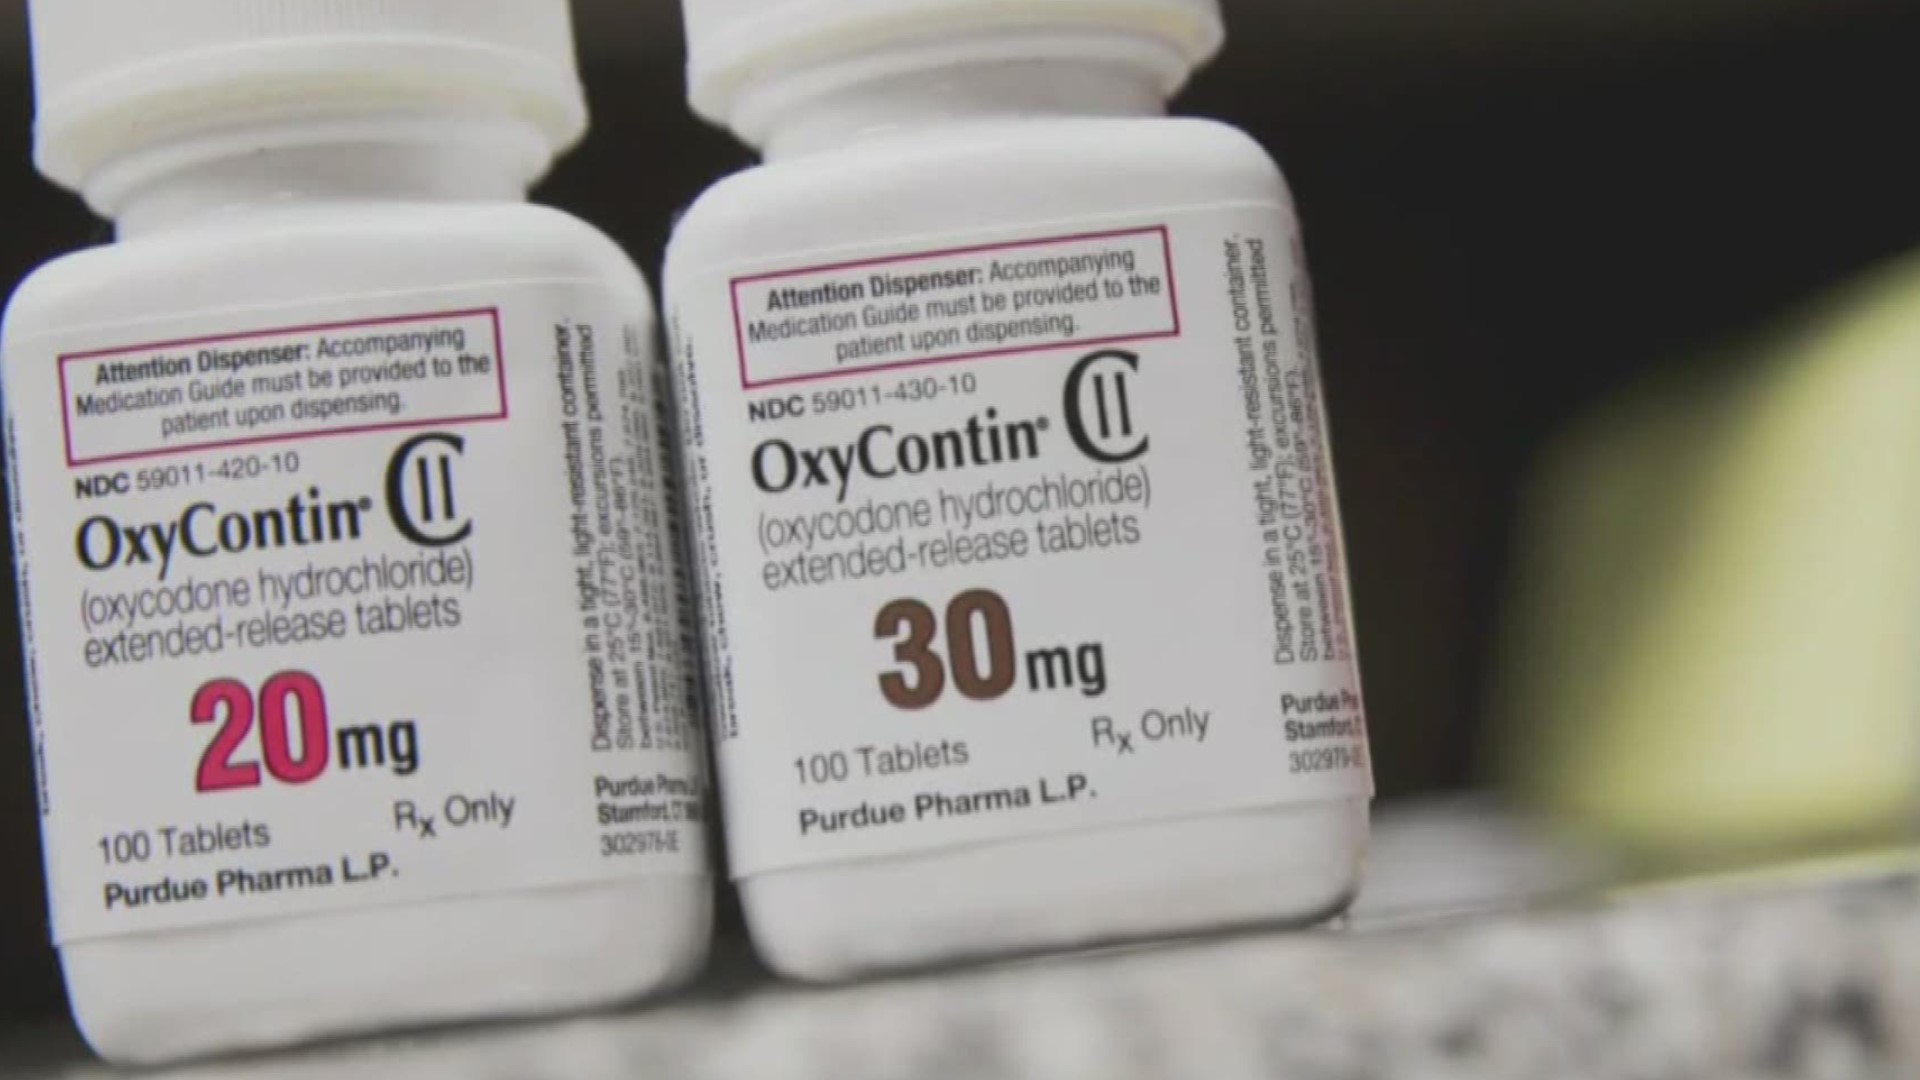 A groundbreaking legal settlement against hte manufacturer of Oxycontin.